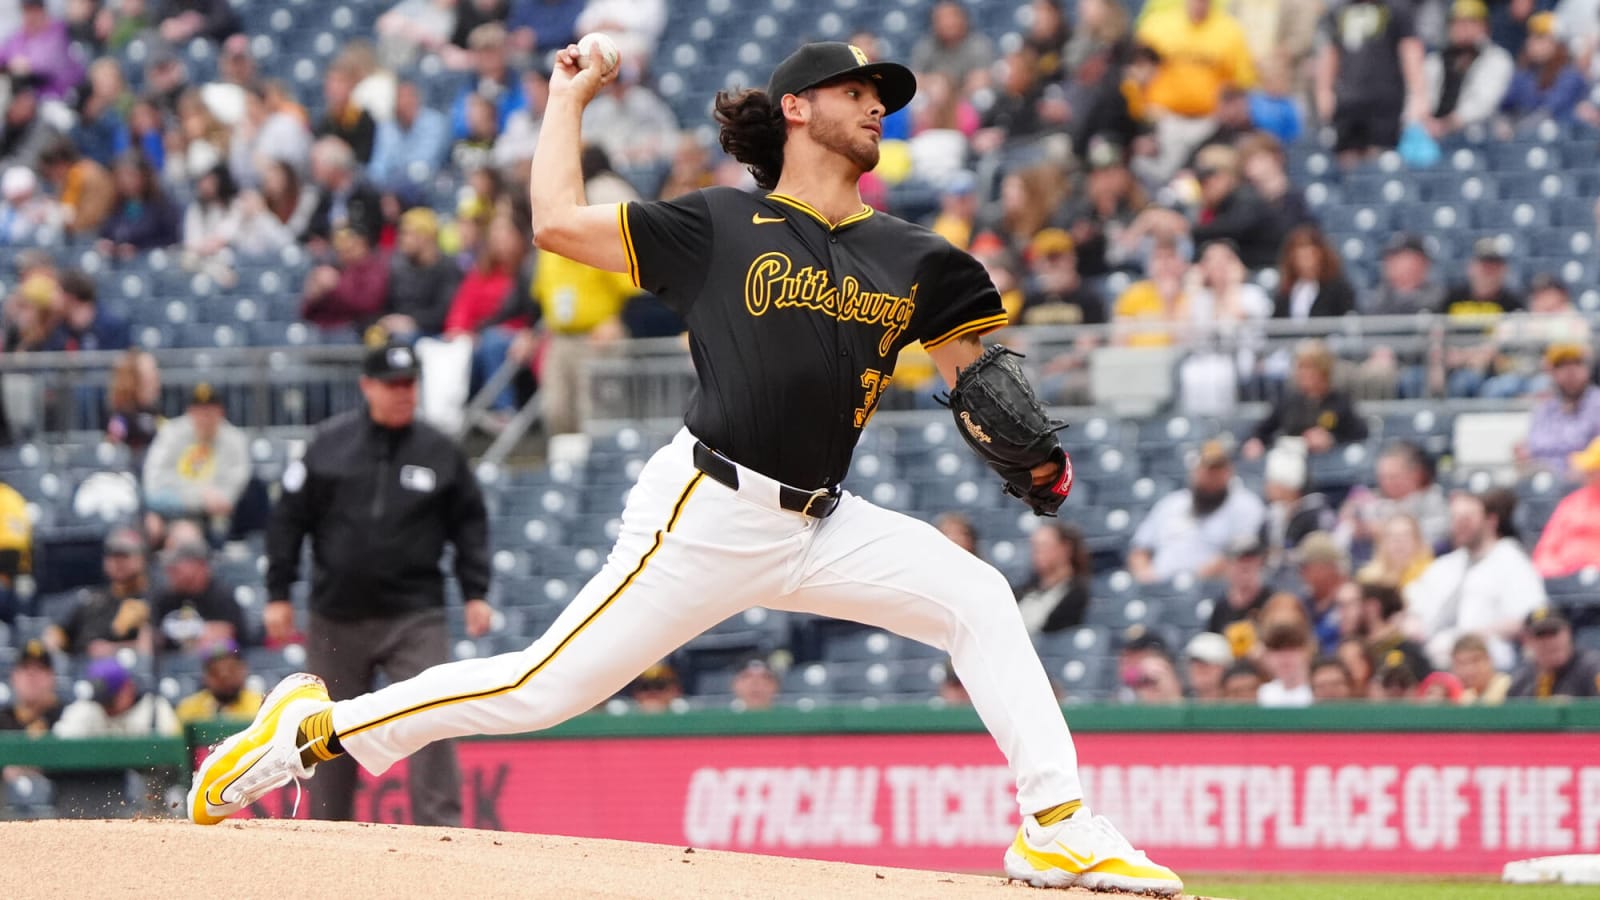 “Gripping It and Ripping It:” Pirates’ Jared Jones Blanks Rockies